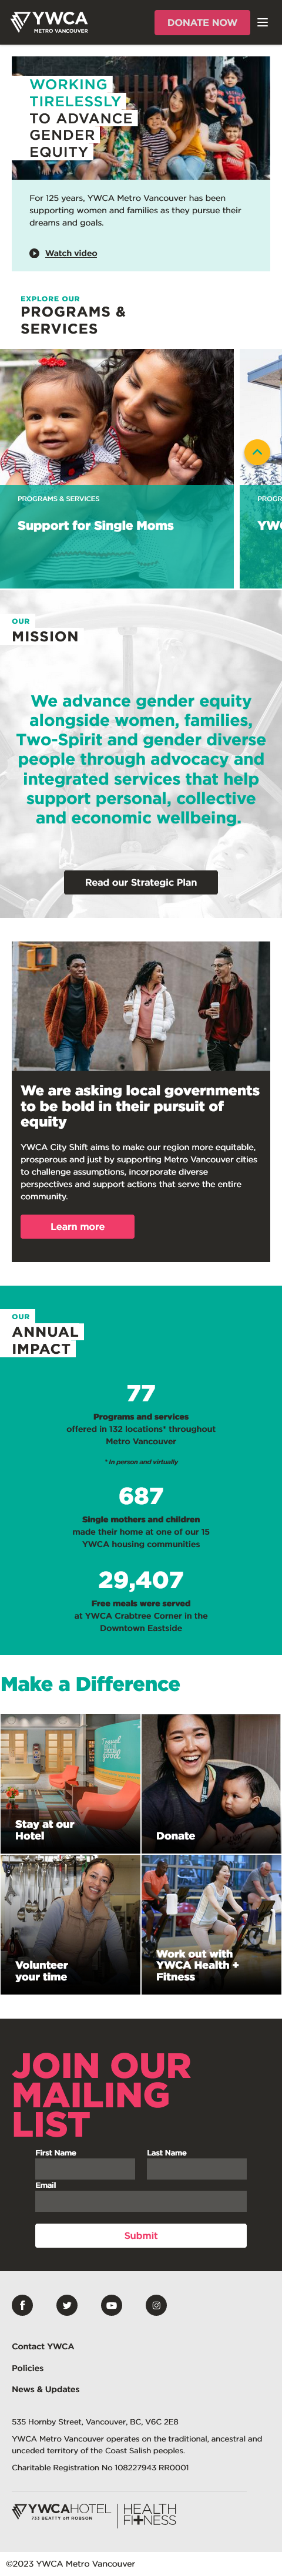 YWCA Metro Vancouver website project, screenshot of homepage on small screen